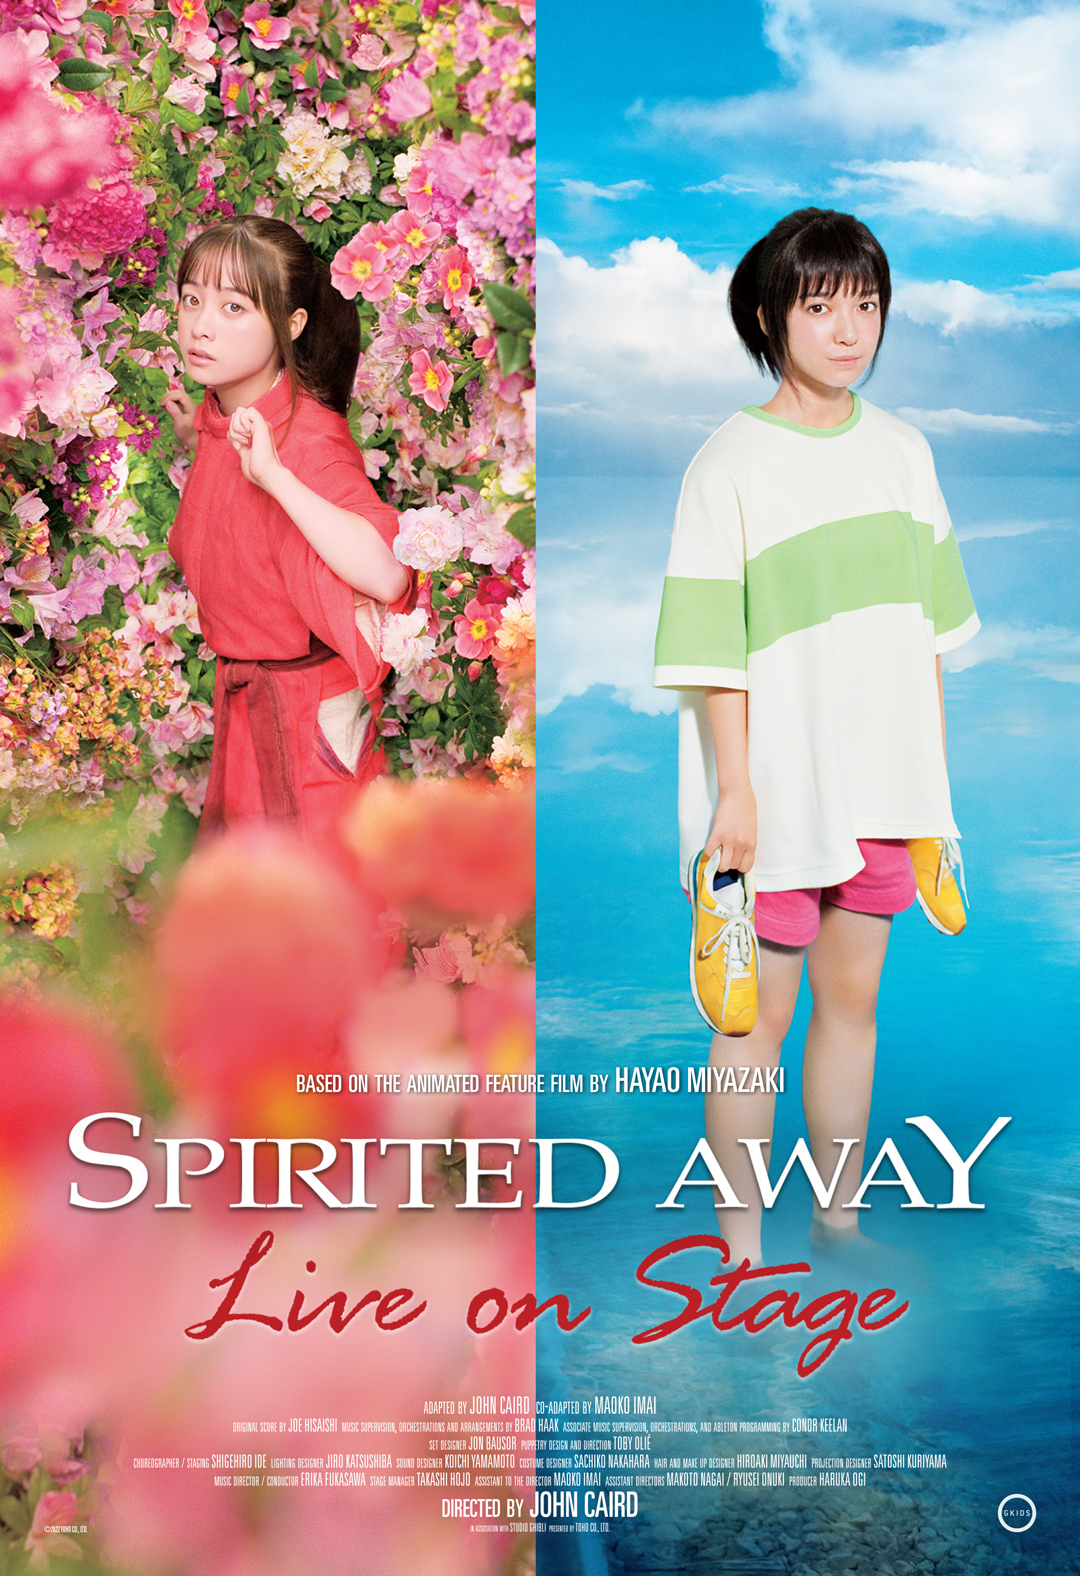 Spirited Away Live on Stage (feat. Kanna Hashimoto) Movie 2023, Official Trailer